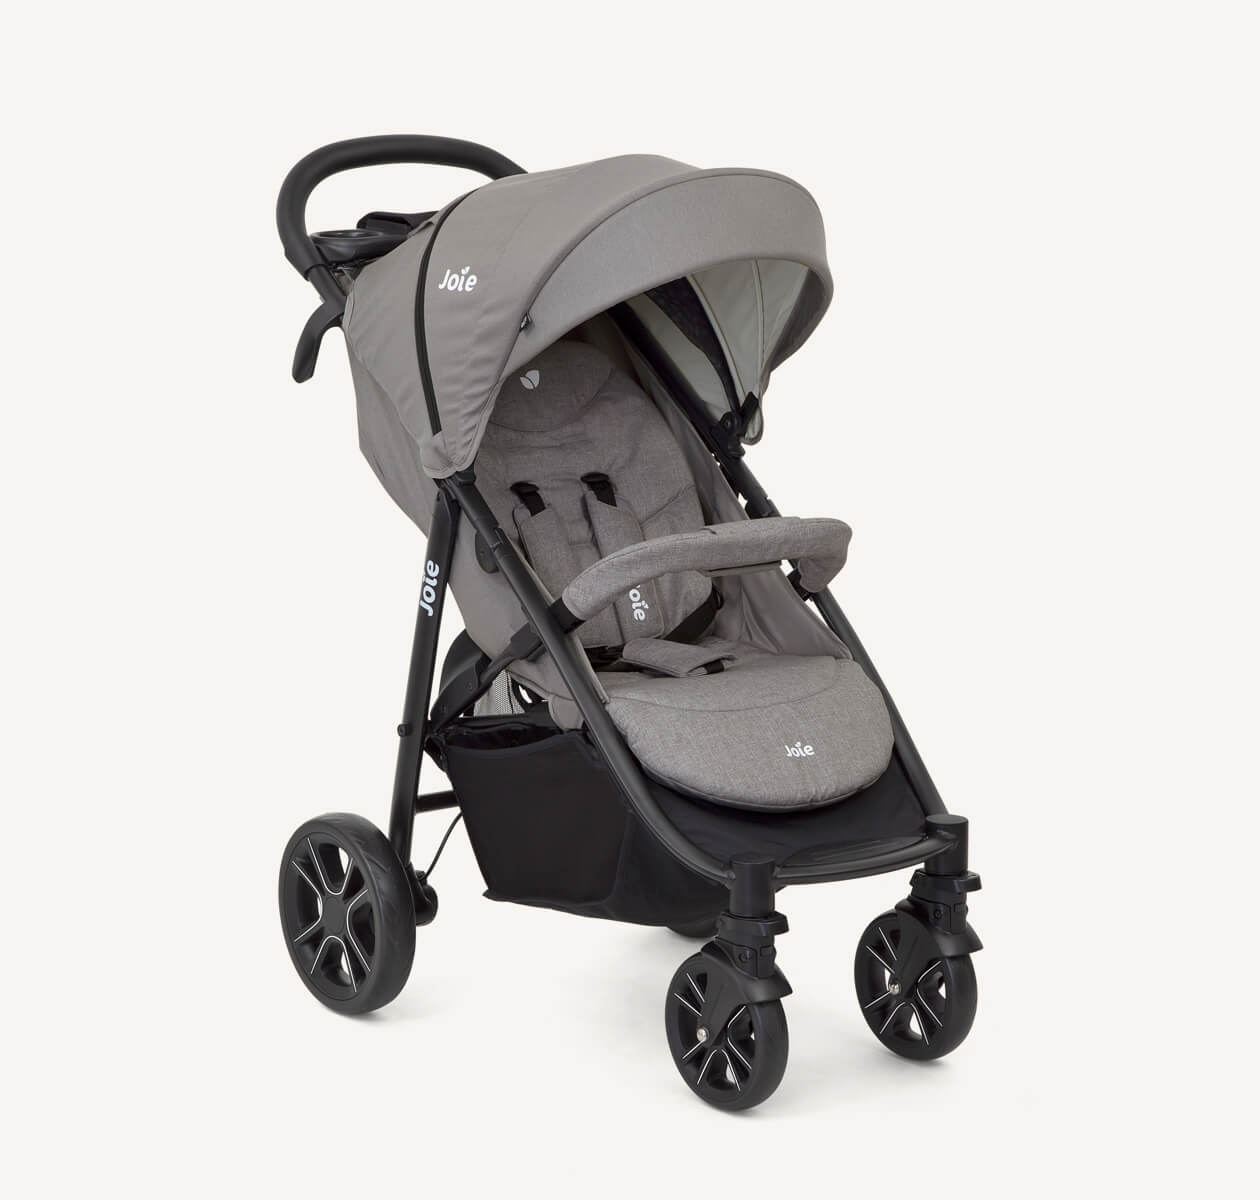 Joie litetrax 4 stroller in gray at an angle 